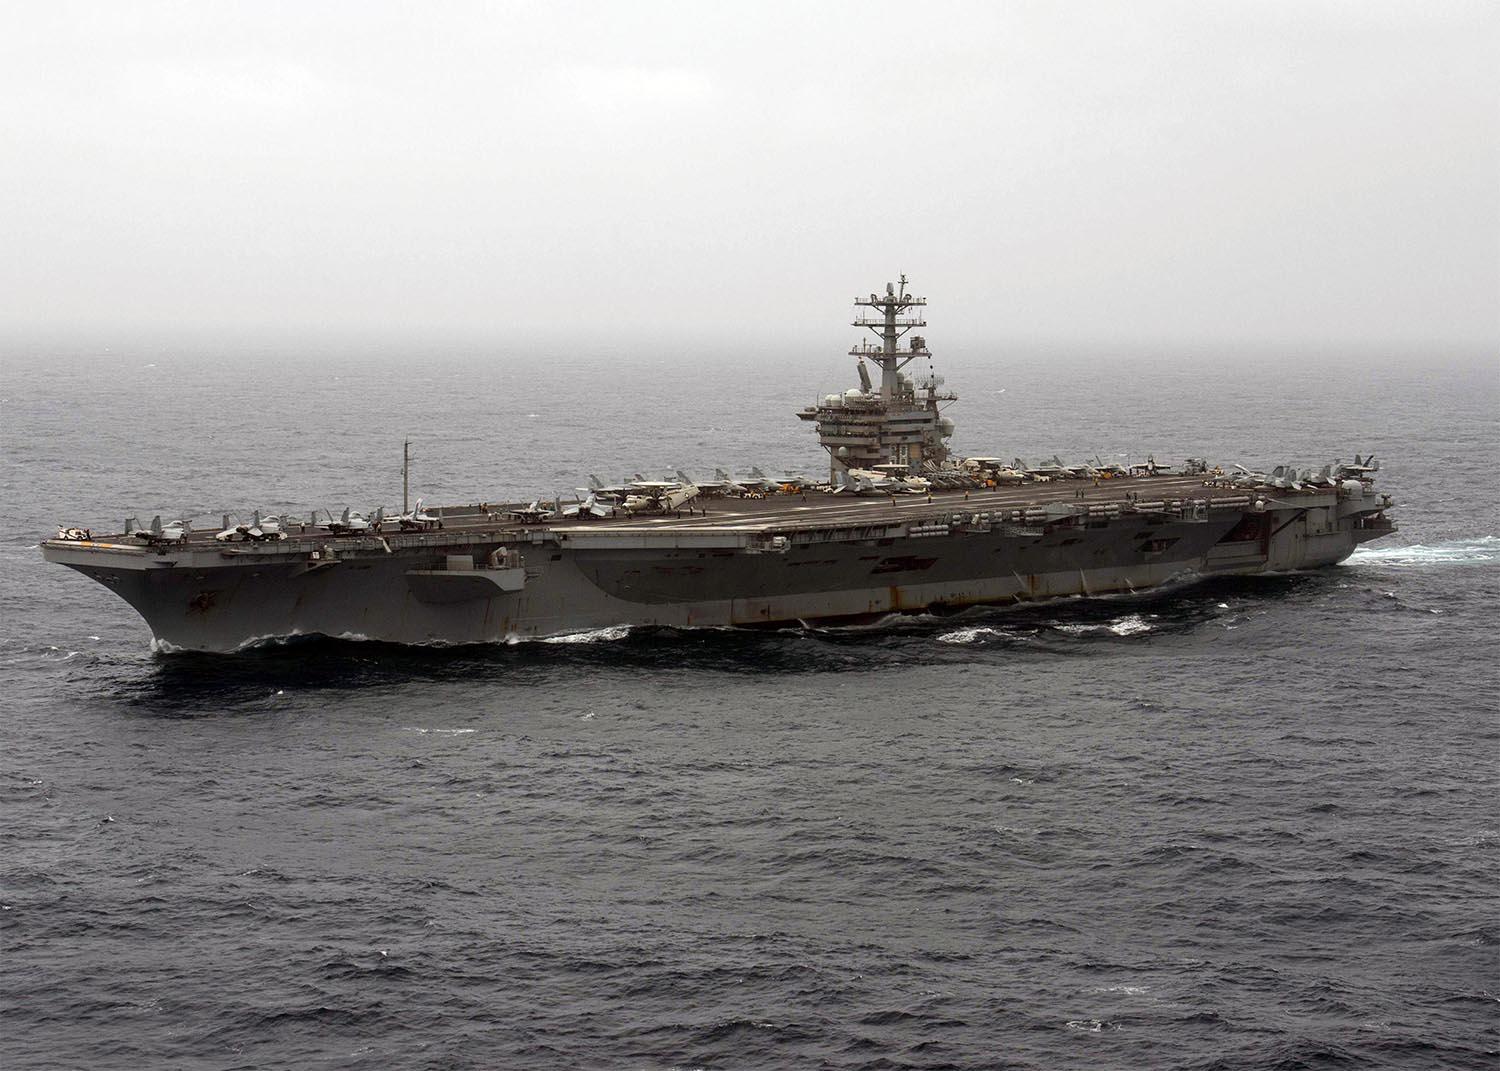 USS Nimitz is expected to stay outside the Arabian Sea